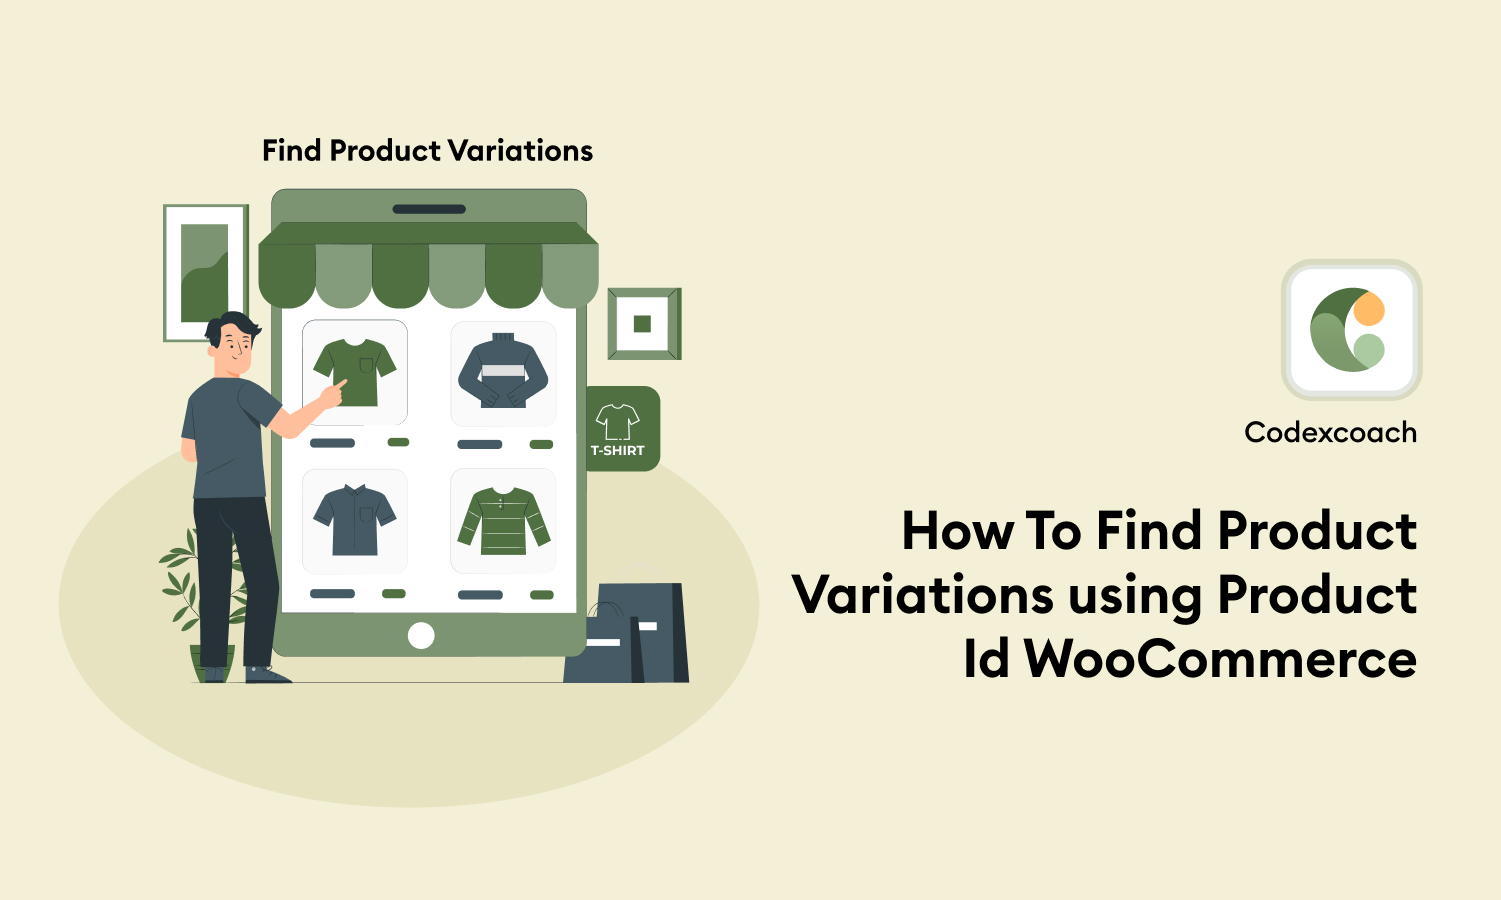 How To Find Product Variations using Product Id WooCommerce